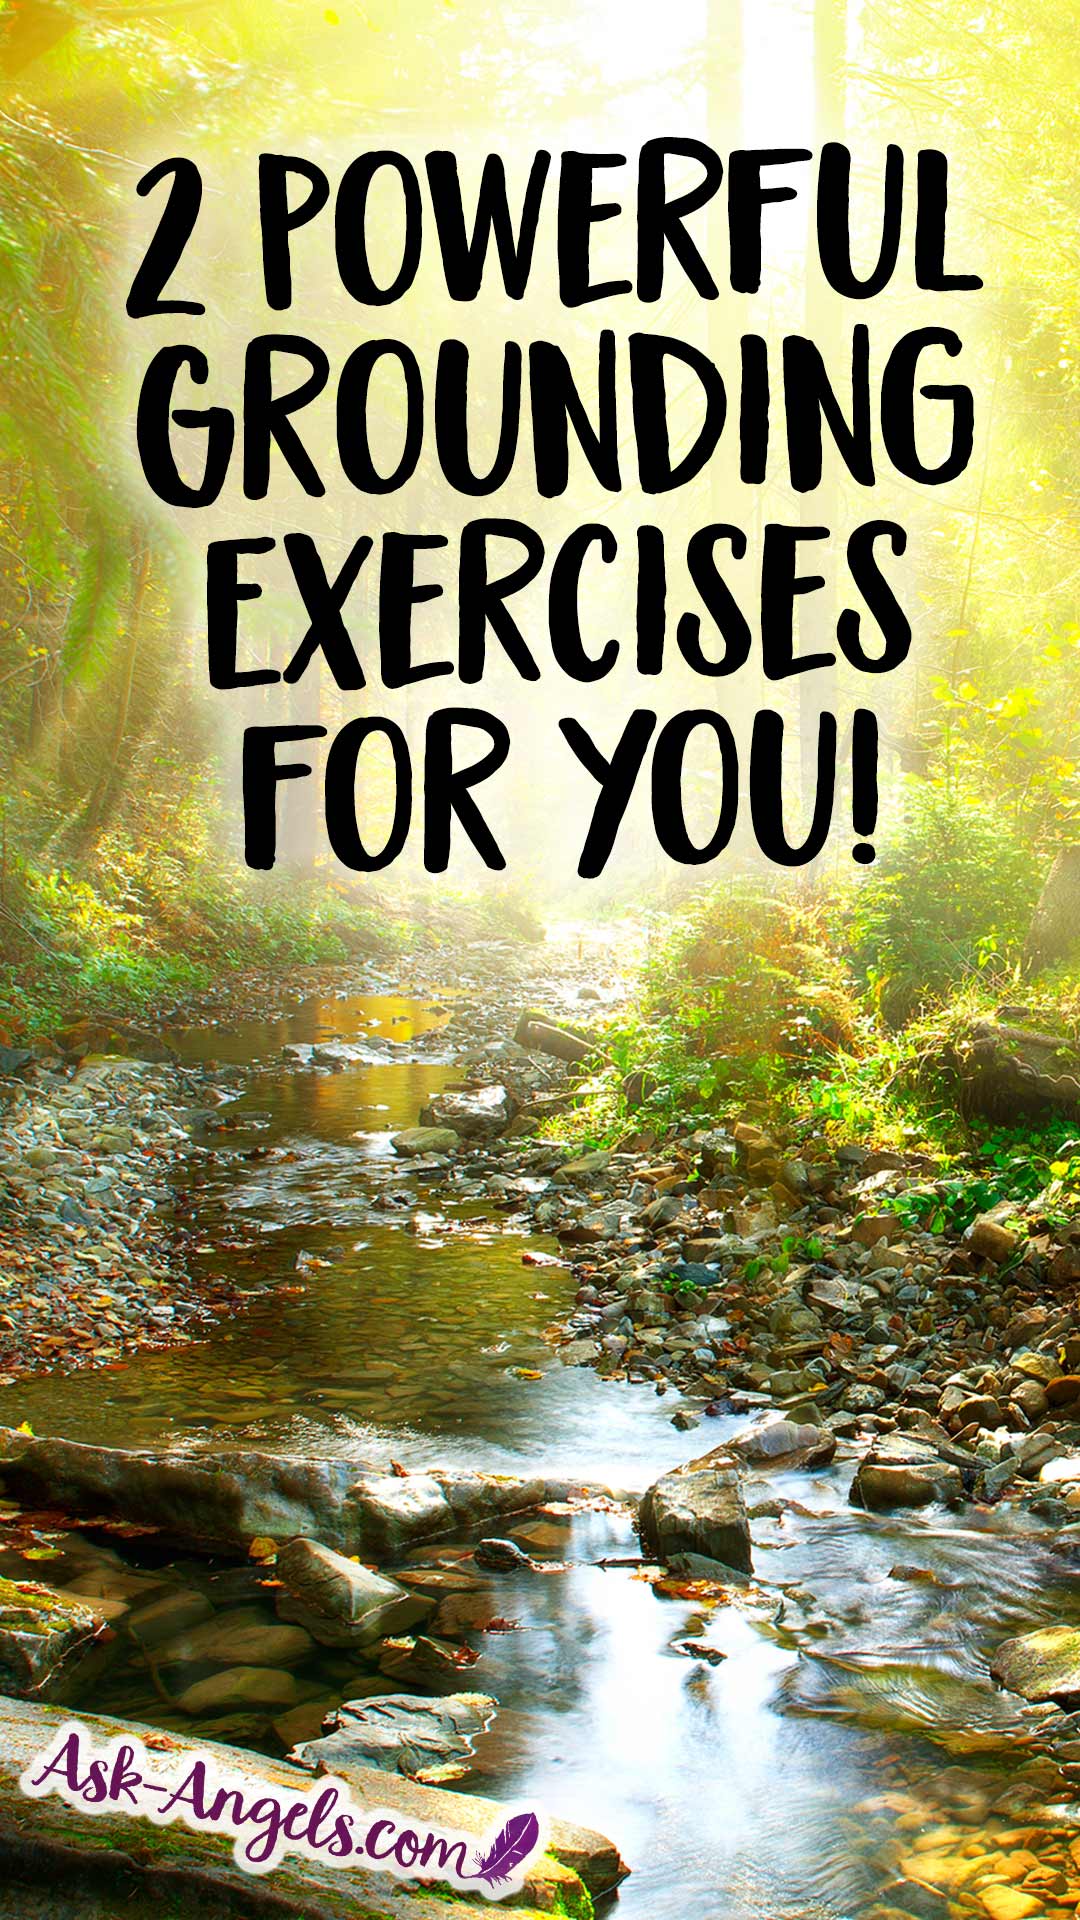 2 Powerful Grounding Exercises for you! Grounding the New Energies and Higher Light!